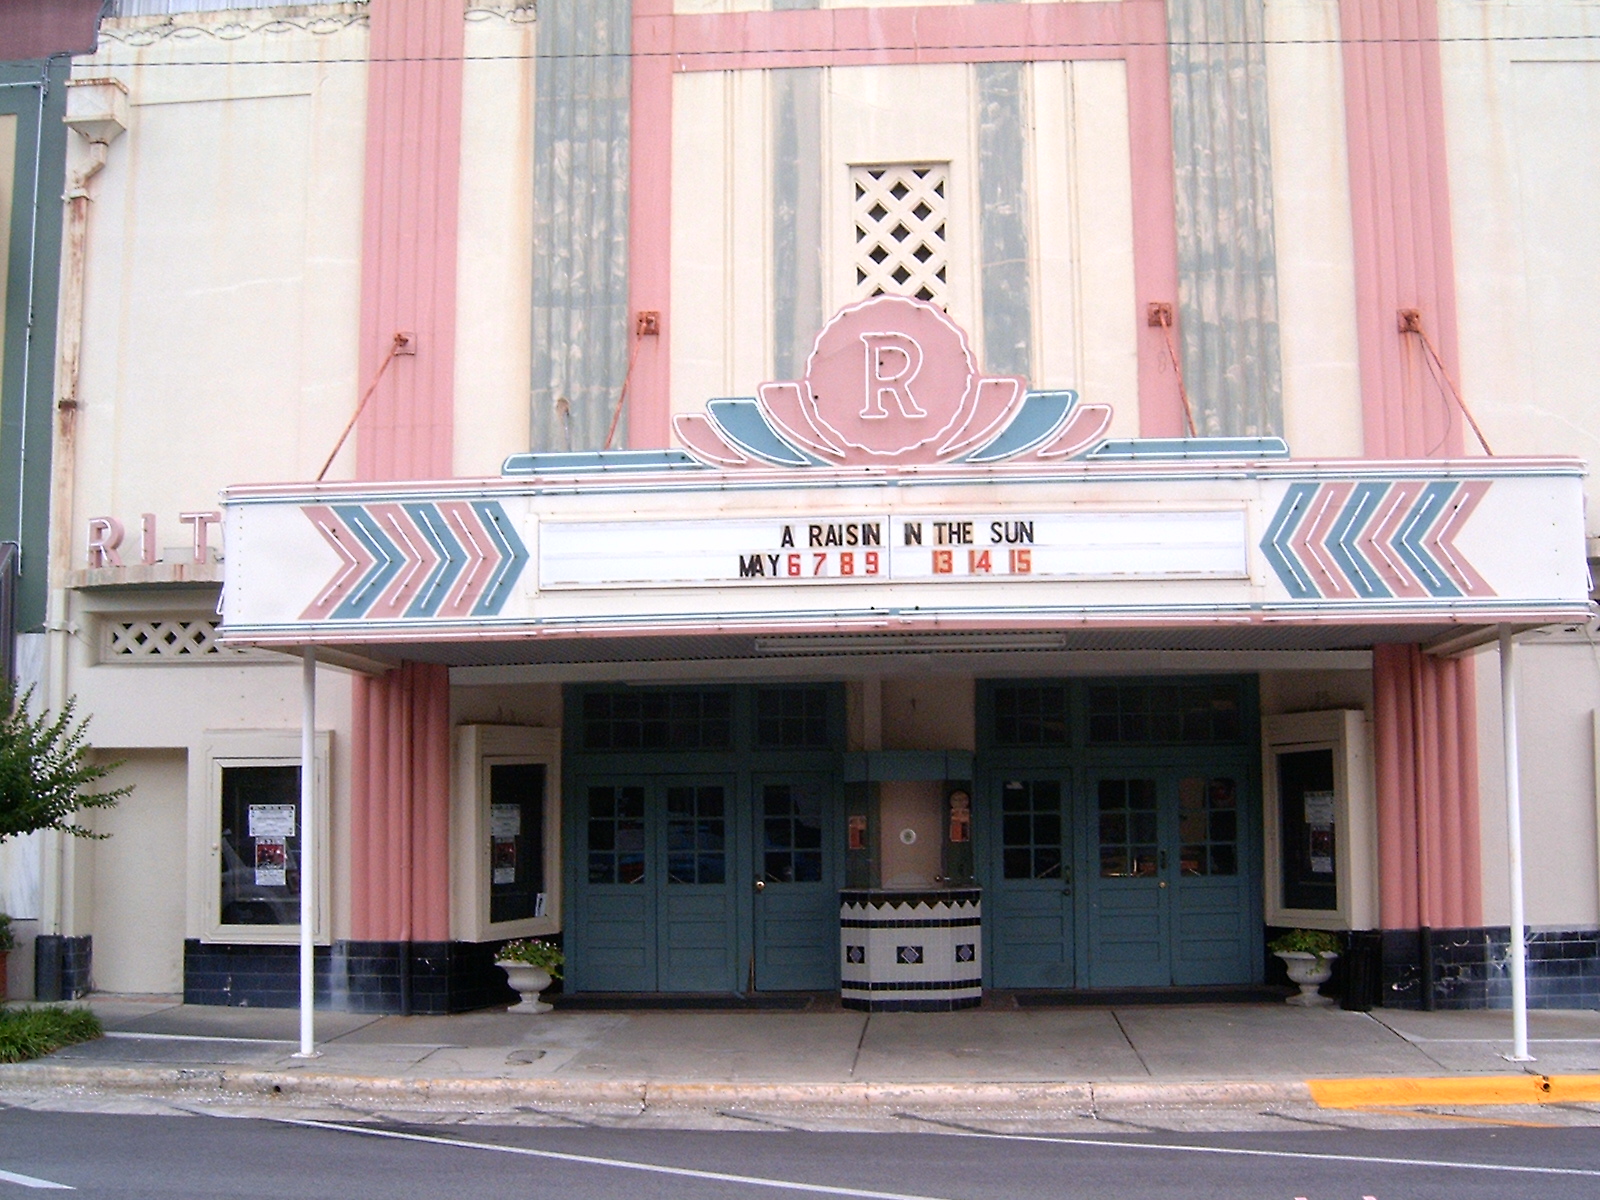 Places To Go, Buildings To See: Ritz Theater - Waycross, Georgia